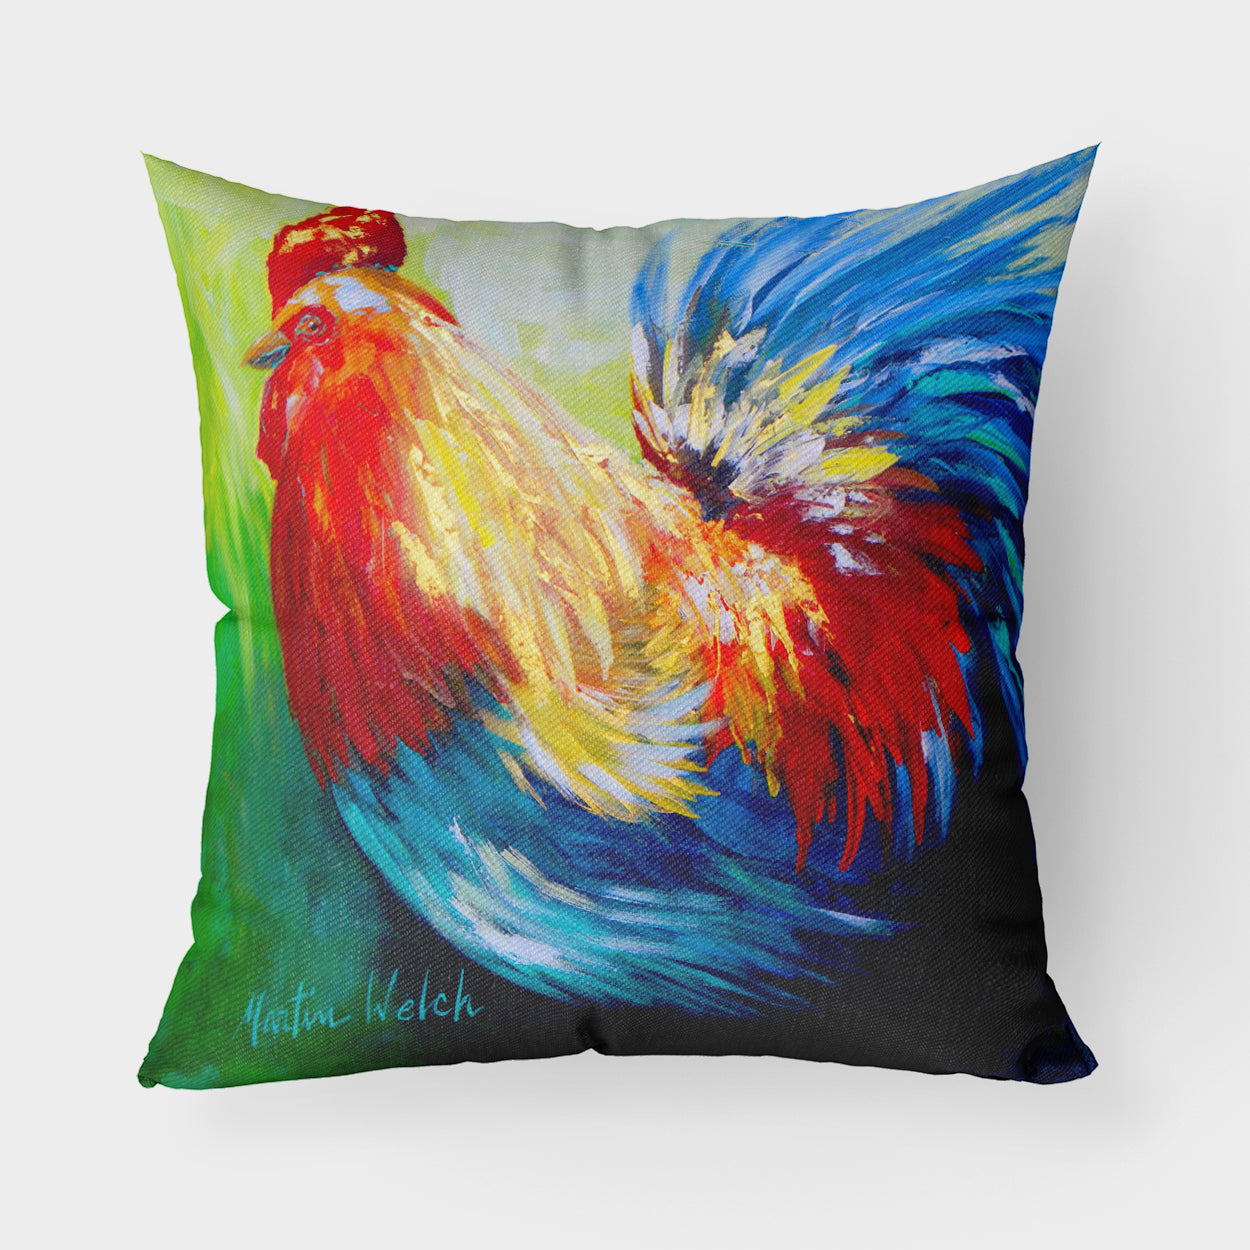 Buy this Rooster Chief Big Feathers Fabric Decorative Pillow